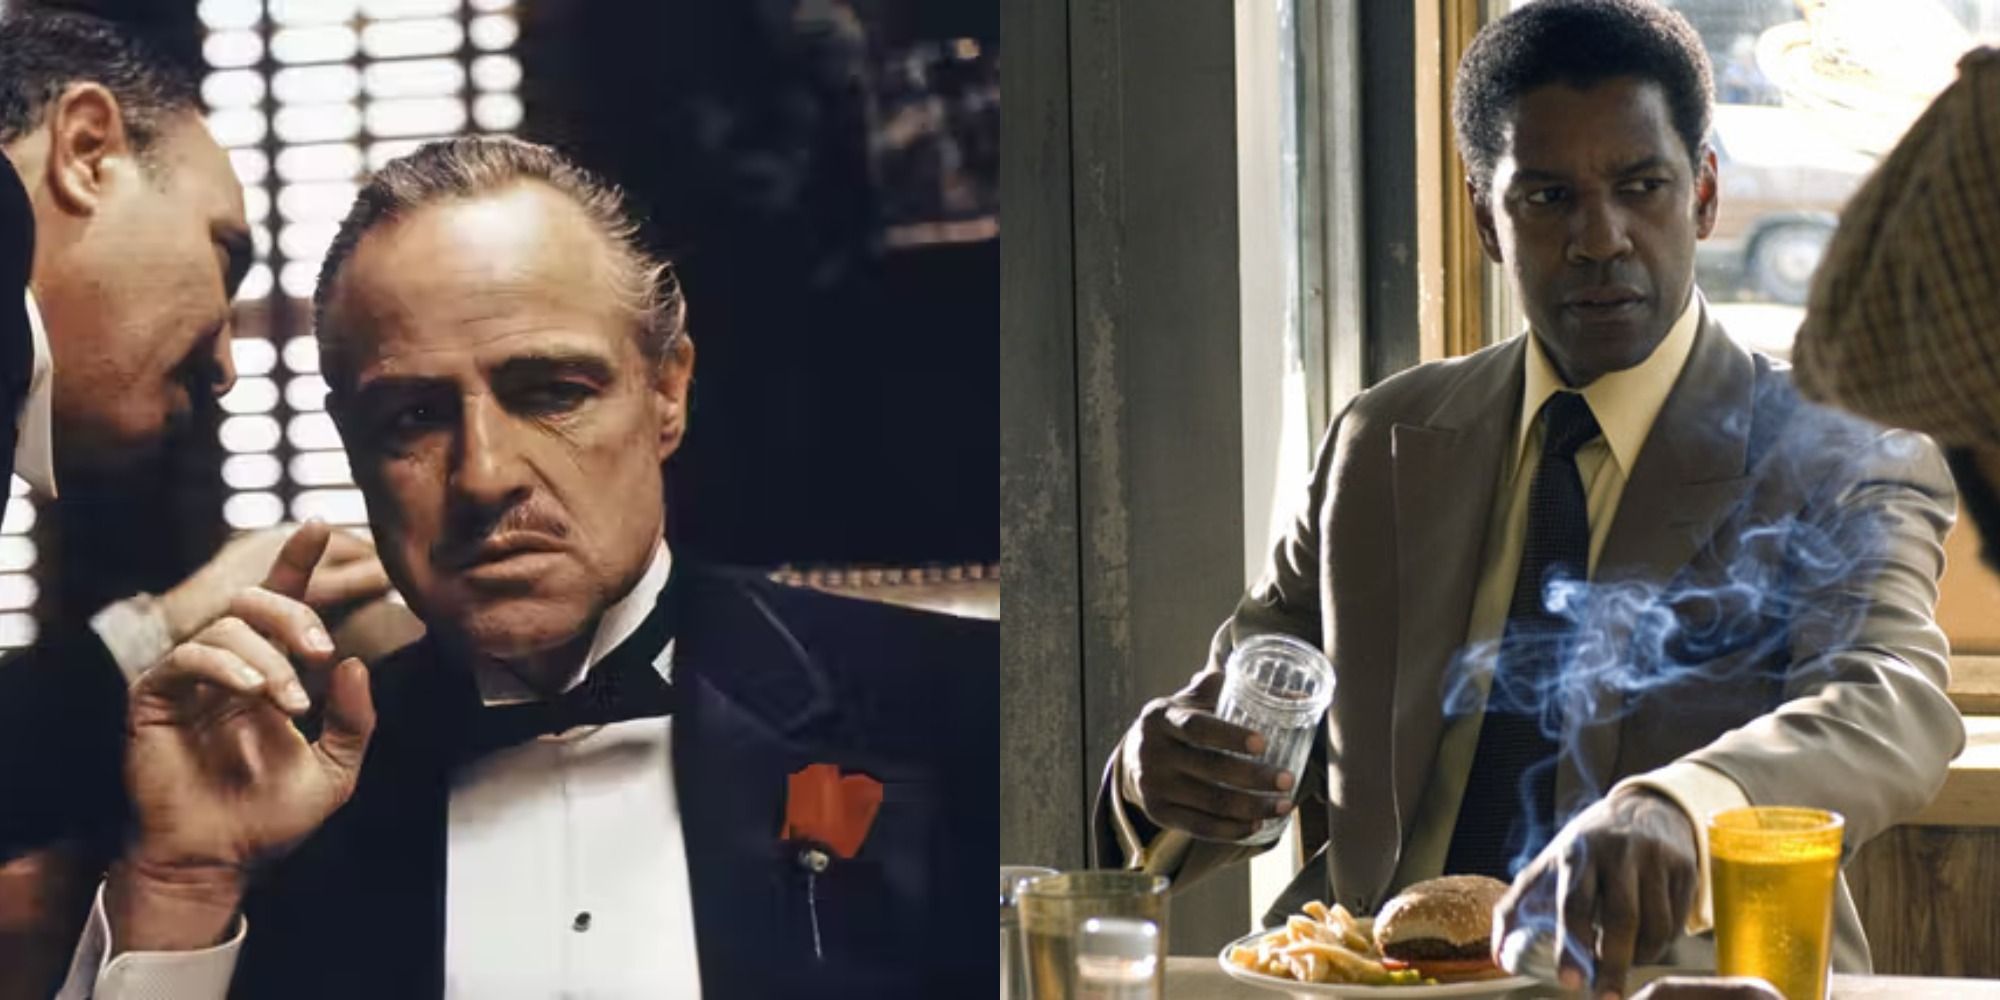 A split image of the Marlon Brando in The Godfather and Denzel Washington in American Gangster